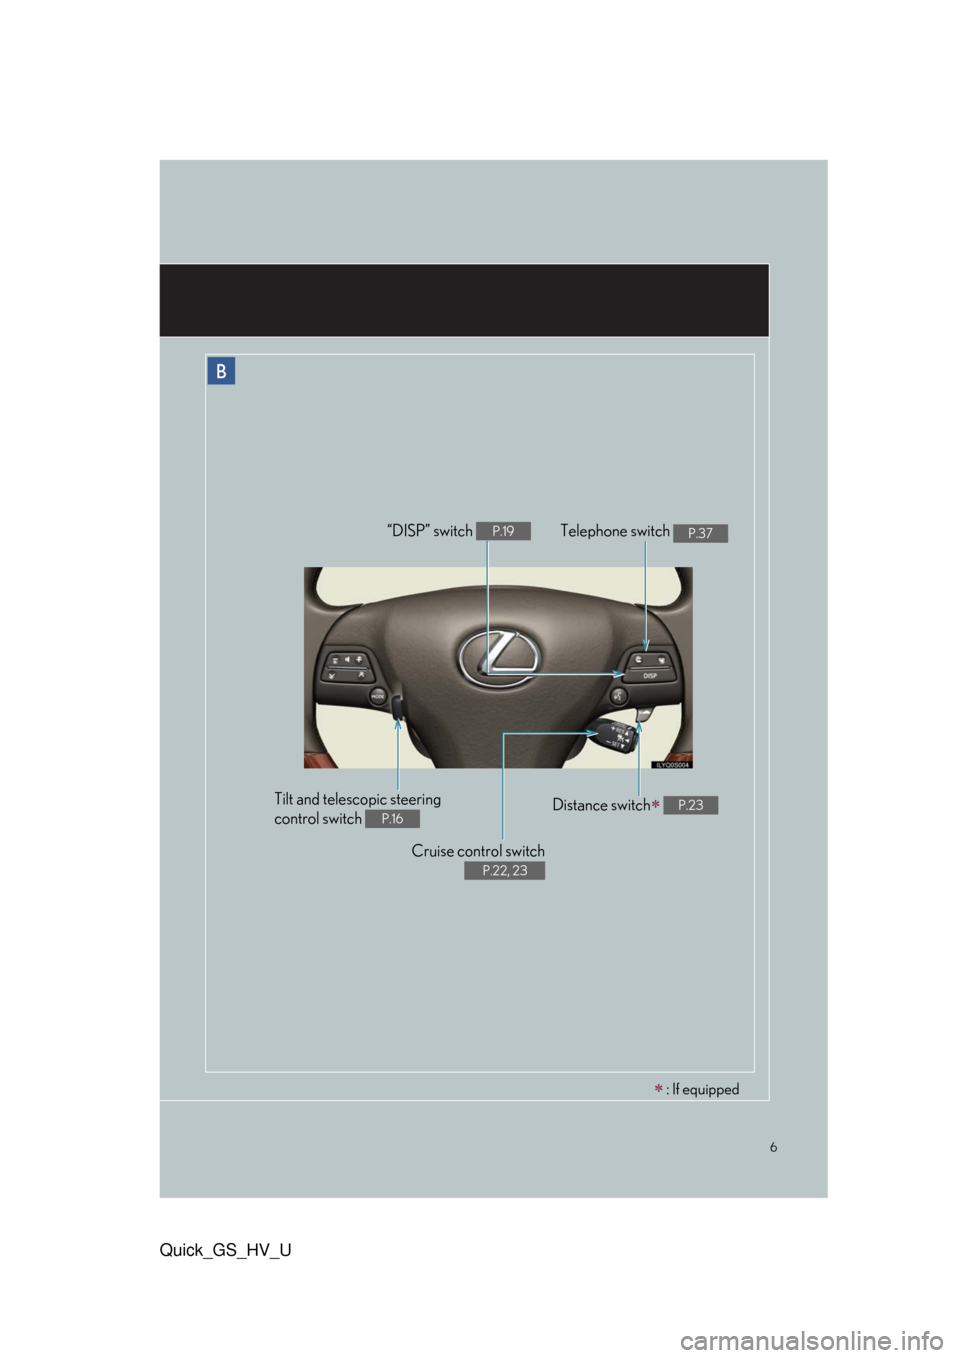 Lexus GS450h 2010  Using The Audio System / LEXUS GS450H QUICK GUIDE OWNERS MANUAL (OM30B86U) 6
Quick_GS_HV_U
B
Cruise control switch
 
P.22, 23
Telephone switch P.37“DISP” switch P.19
Distance switch P.23Tilt and telescopic steering 
control switch 
P.16
 : If equipped 